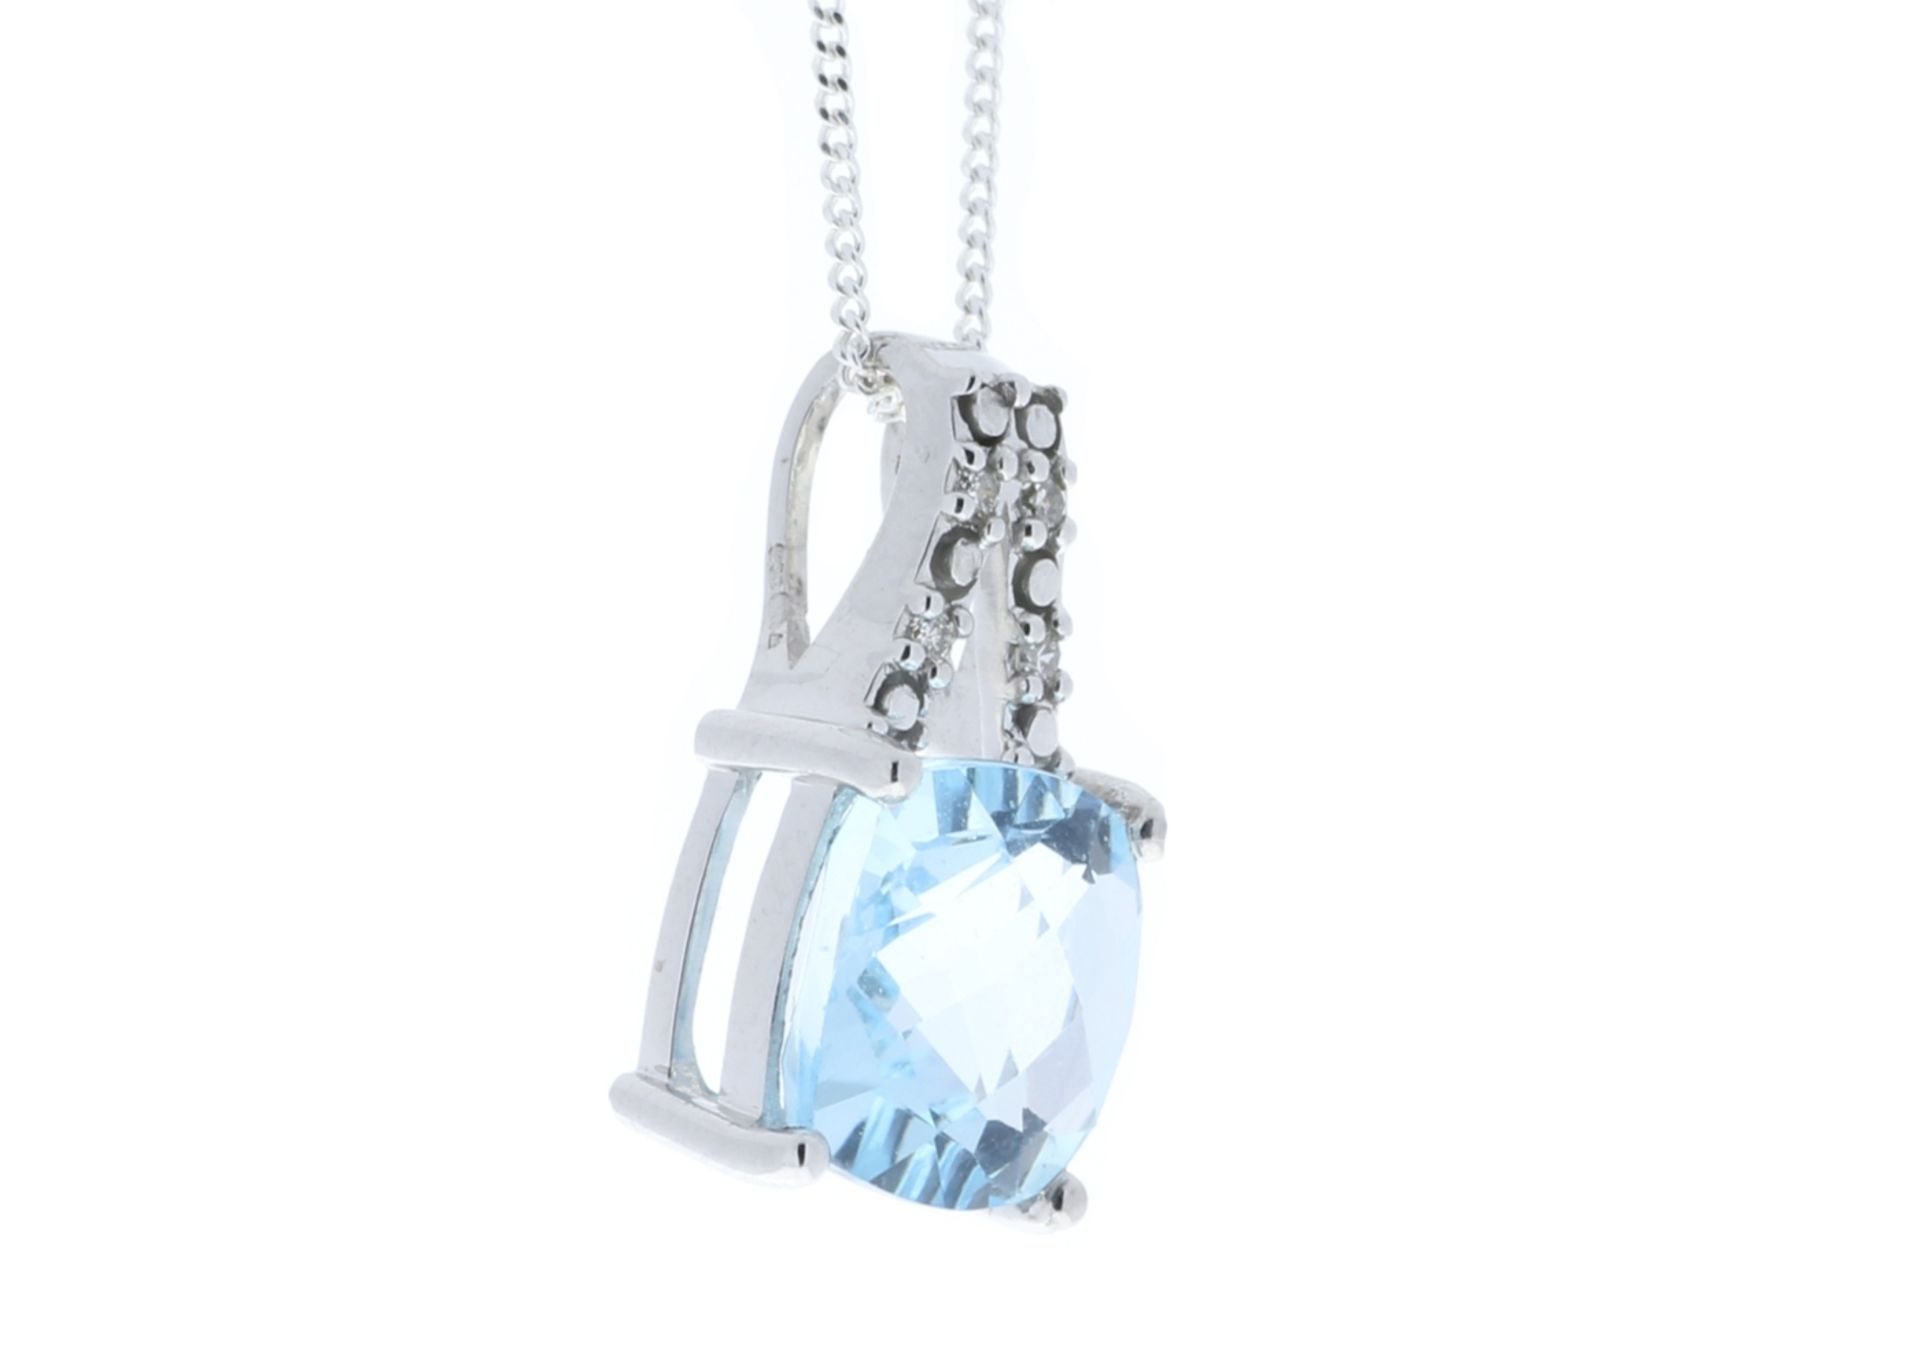 9ct White Gold Diamond And Blue Topaz Pendant (BT3.54) 0.05 Carats - Valued By GIE £1,470.00 - A - Image 2 of 10